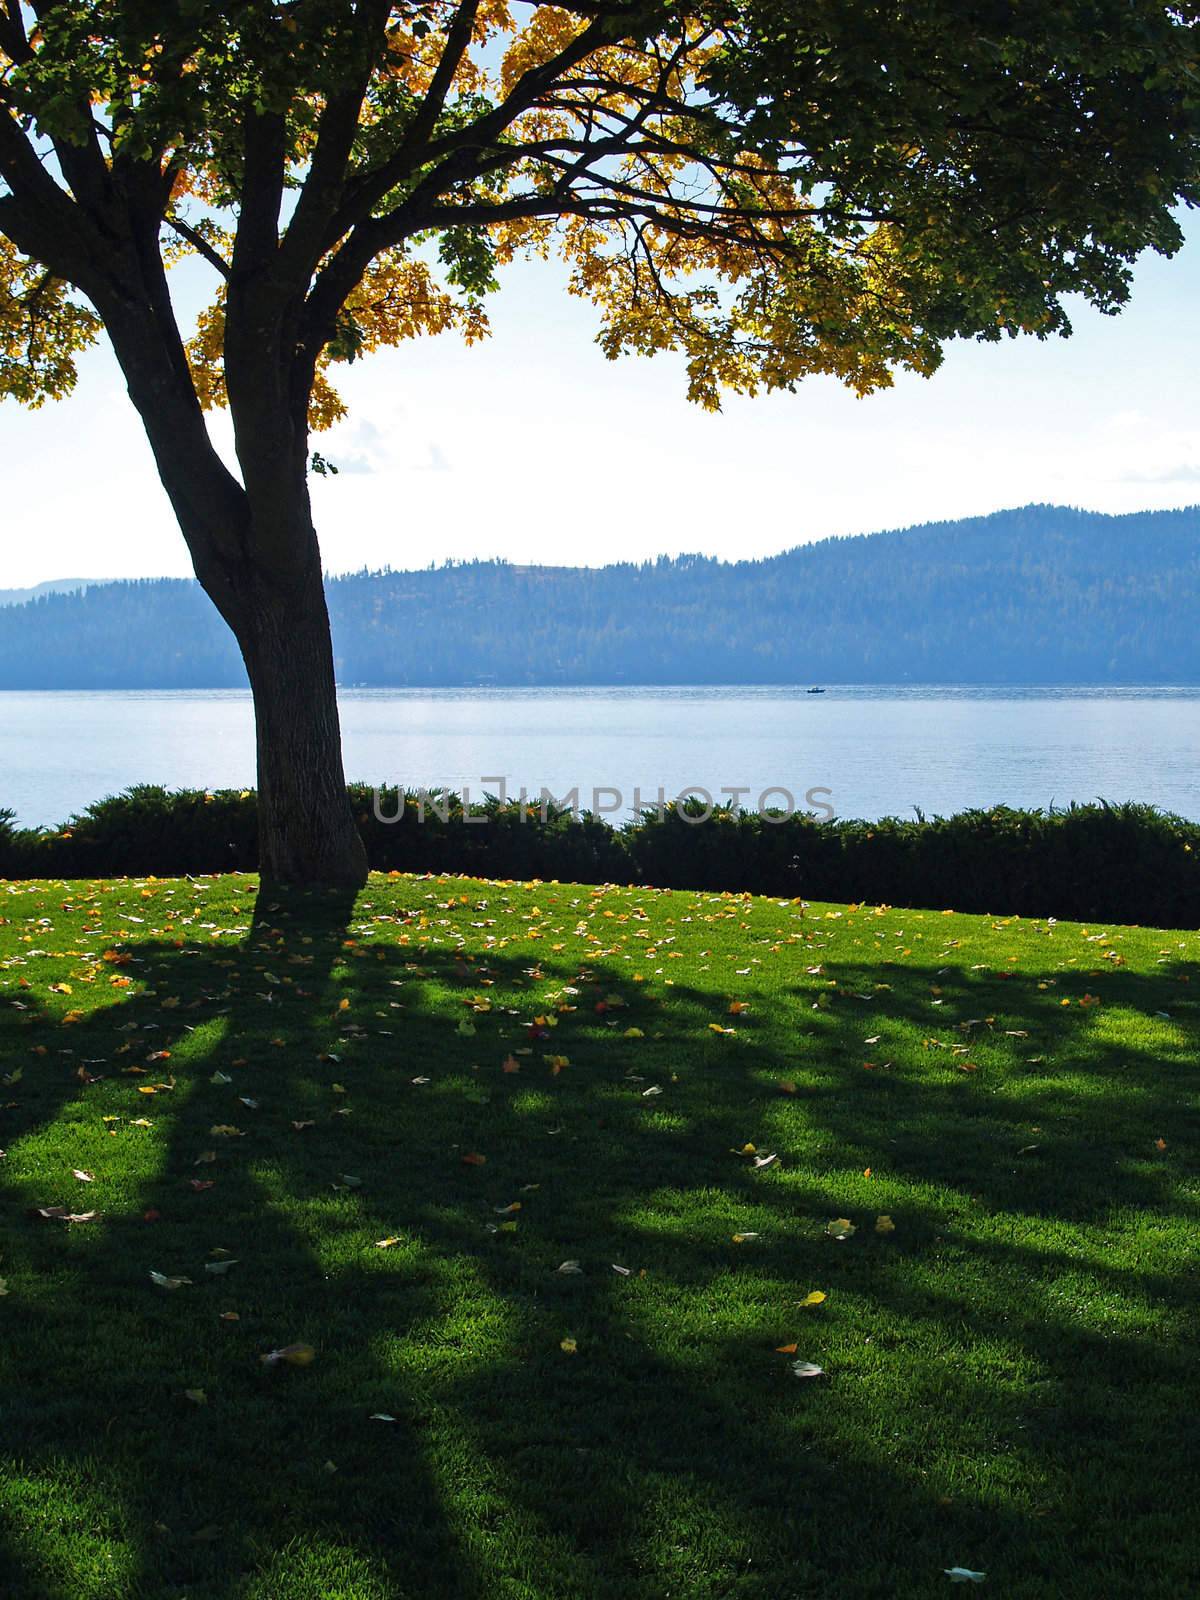 Grassy Park with a Tree Silhouette and Mountain Lake in Background Coeur d'Alene Idaho USA